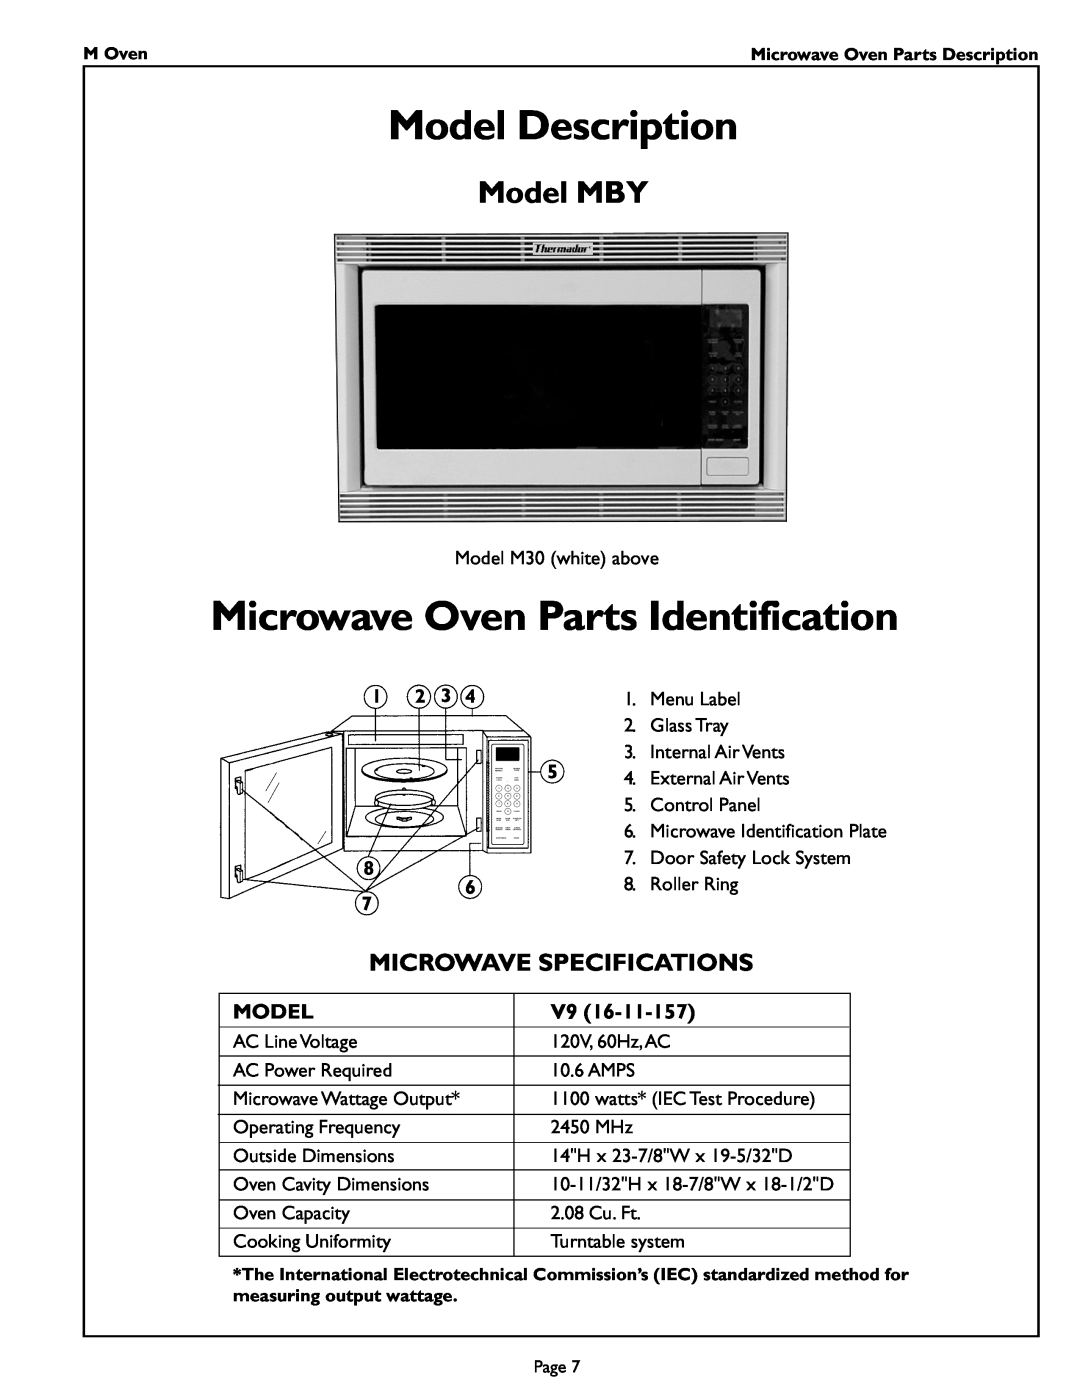 Thermador MT27 manual Model Description, Microwave Oven Parts Identification, Model MBY, Microwave Specifications 